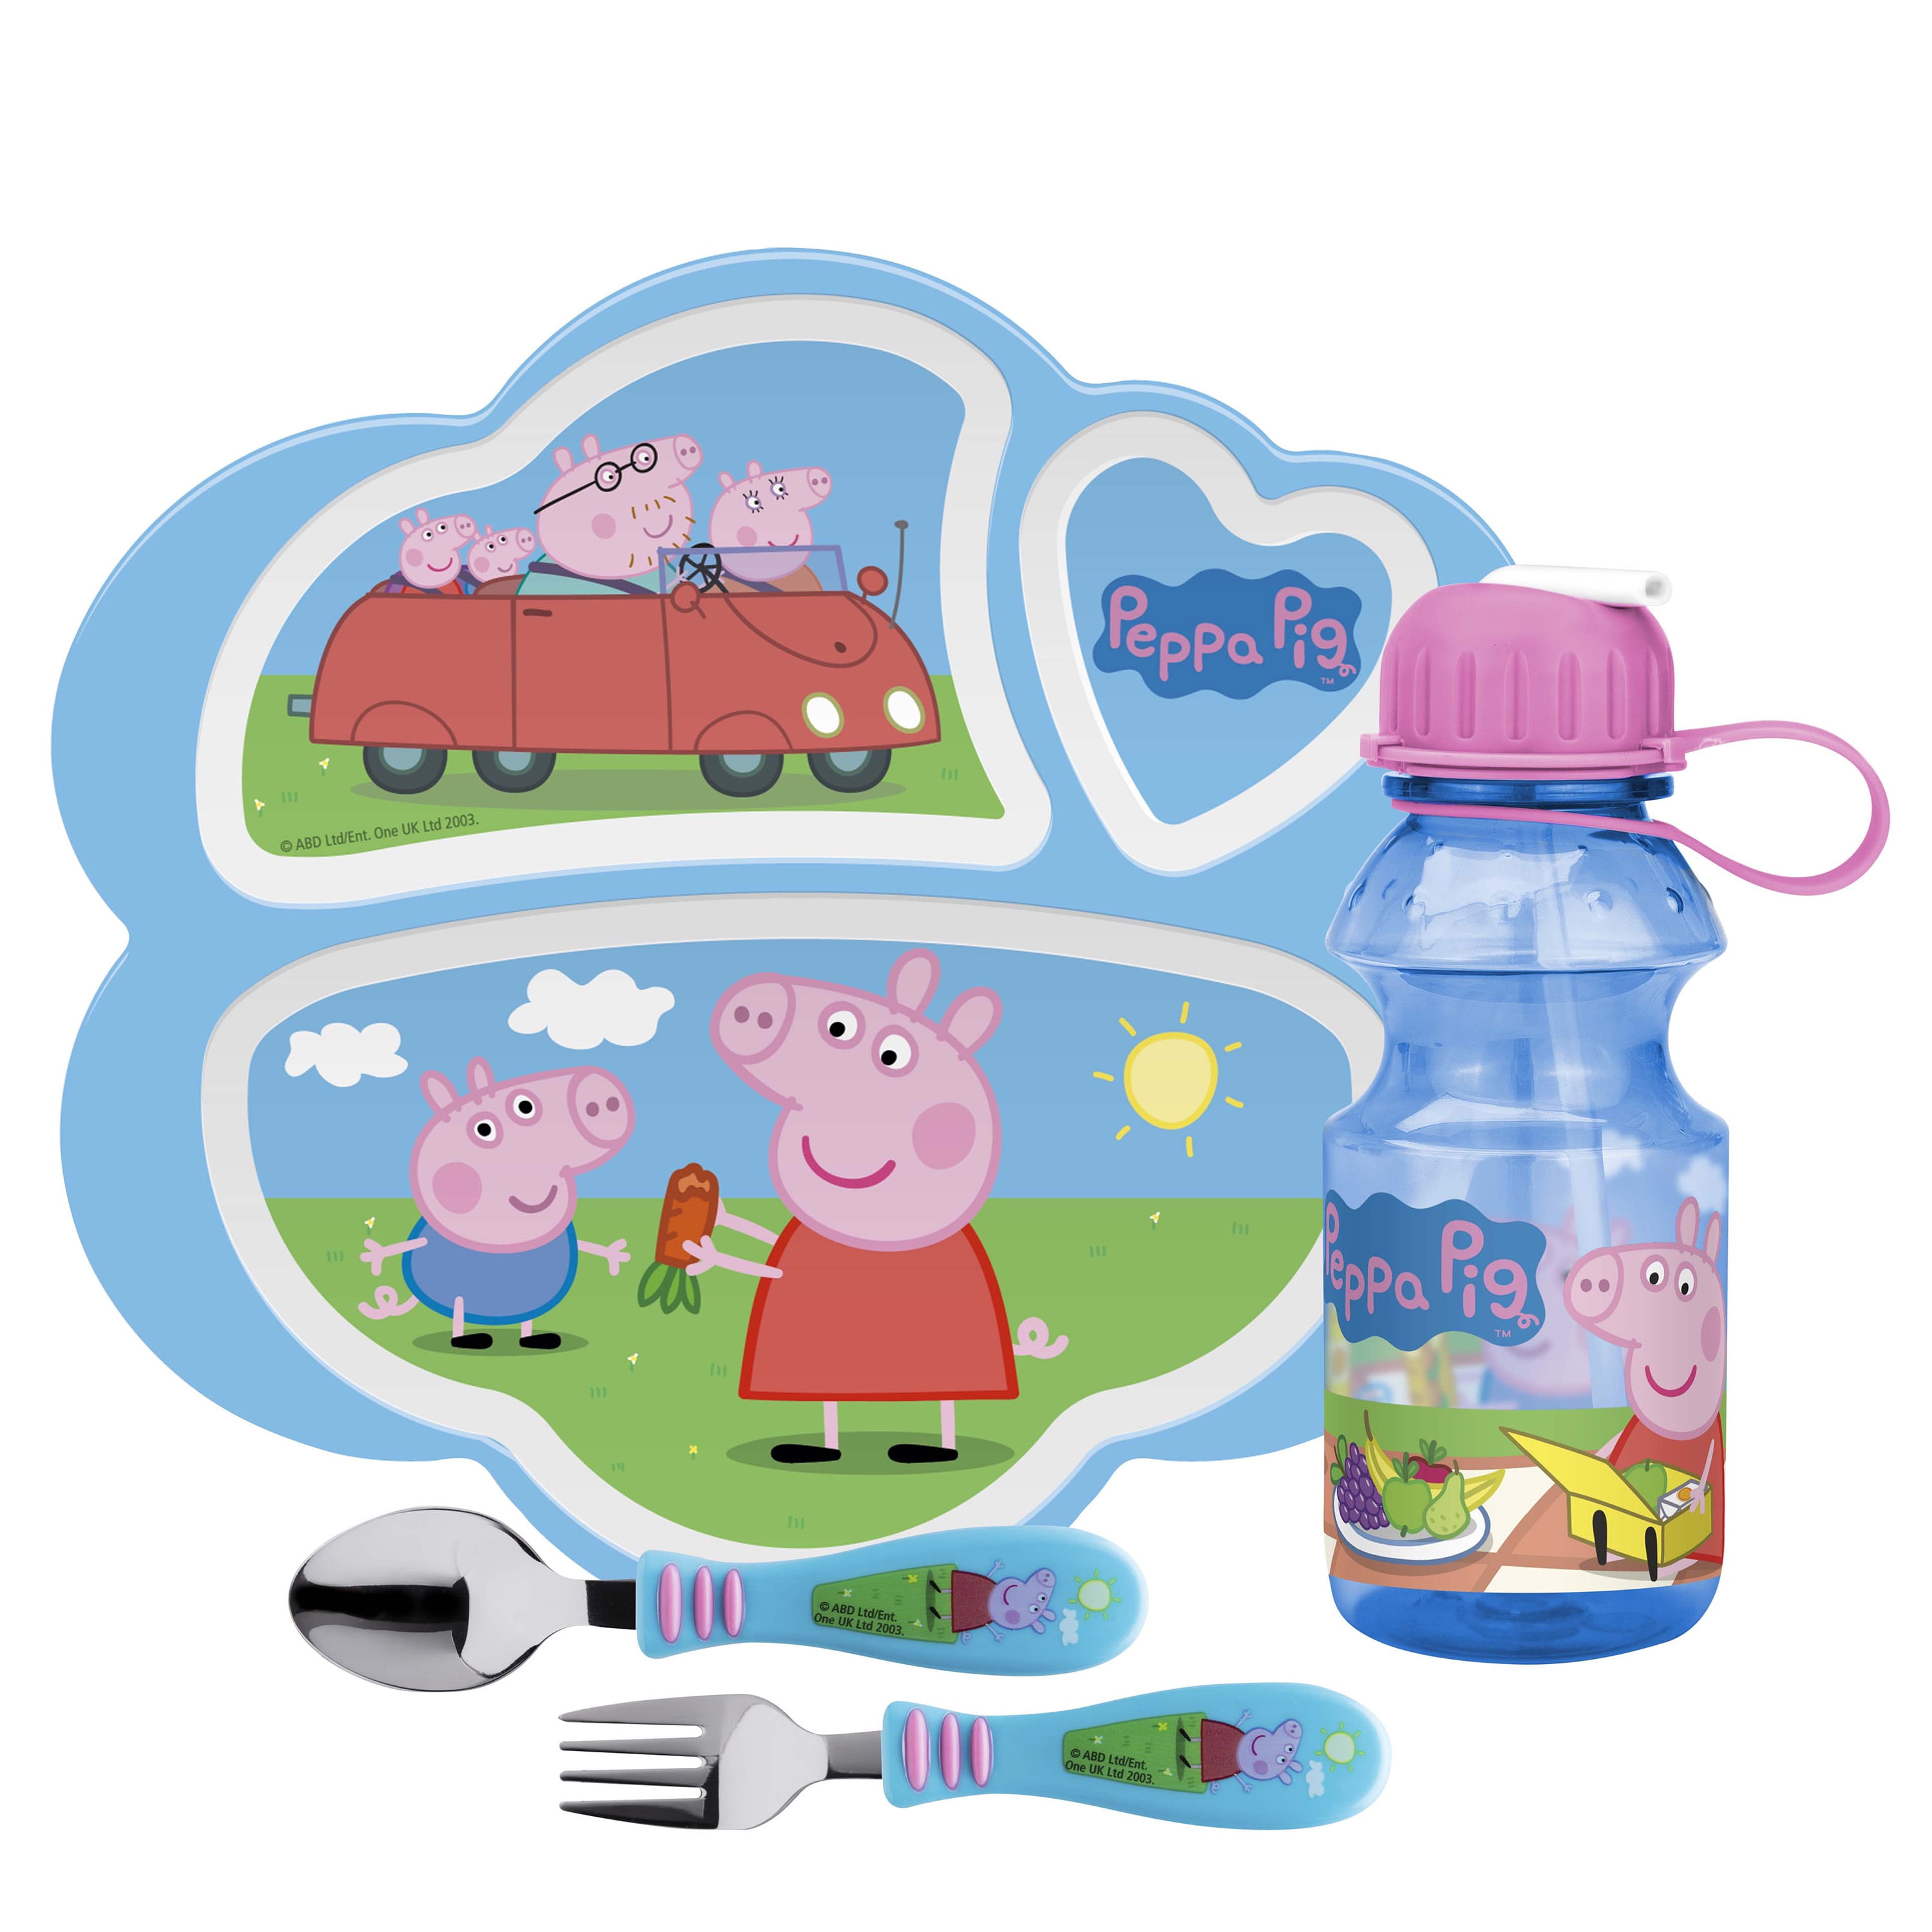 Kids Peppa Pig Dinner/Lunch Plate Green Yellow Micro Safe Toddler Mealtime Food 